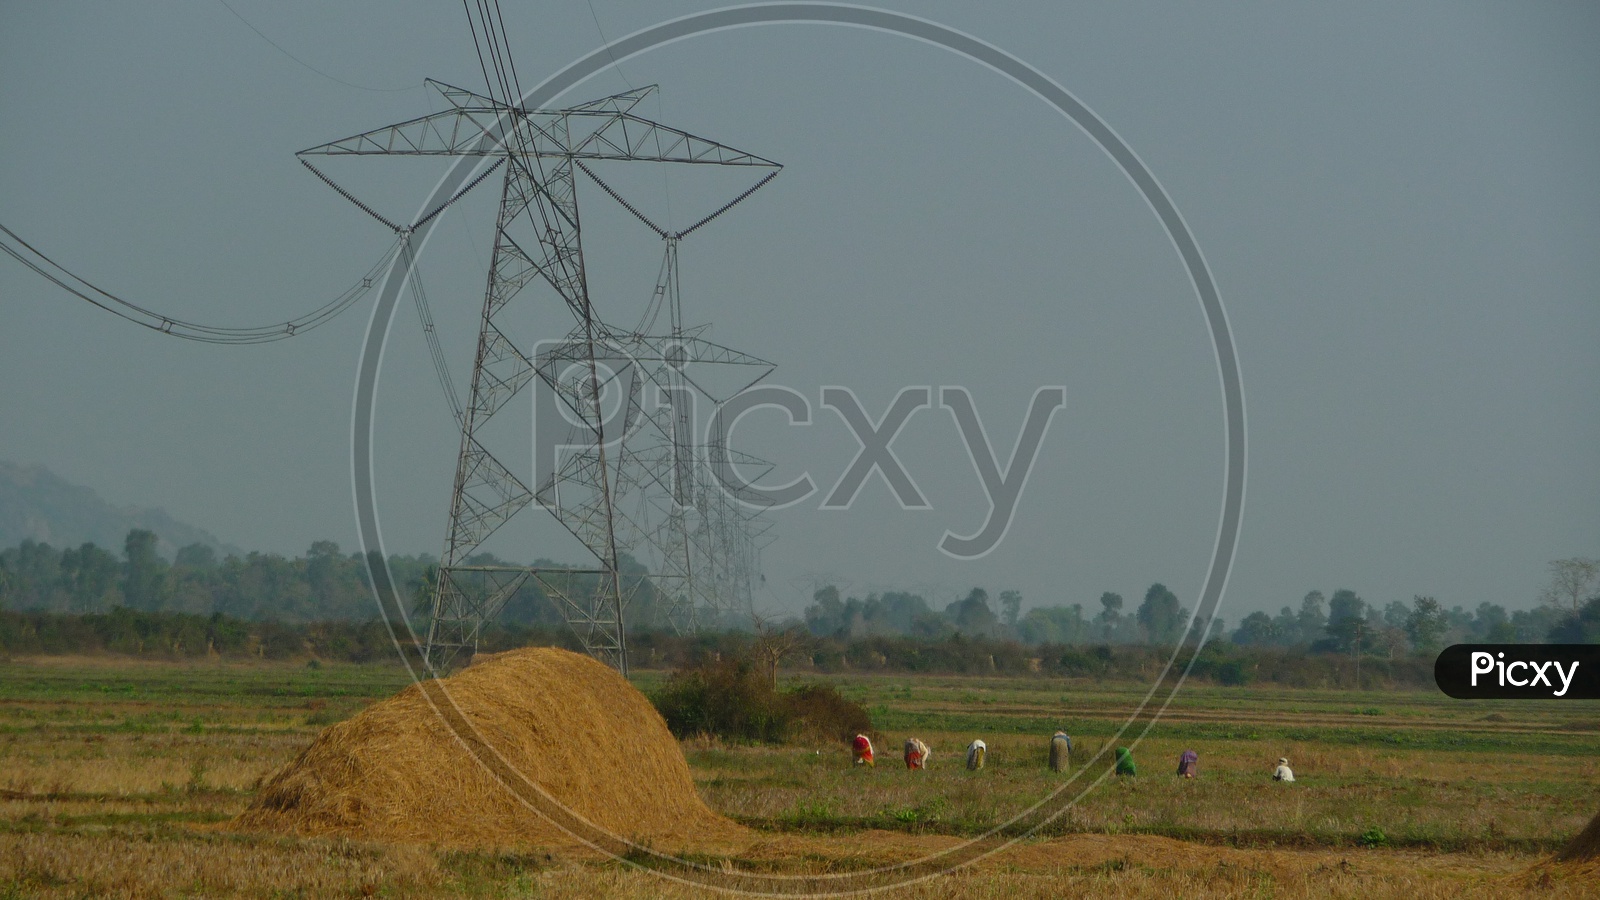 High Tension Transmission Lines in Agriculture Field